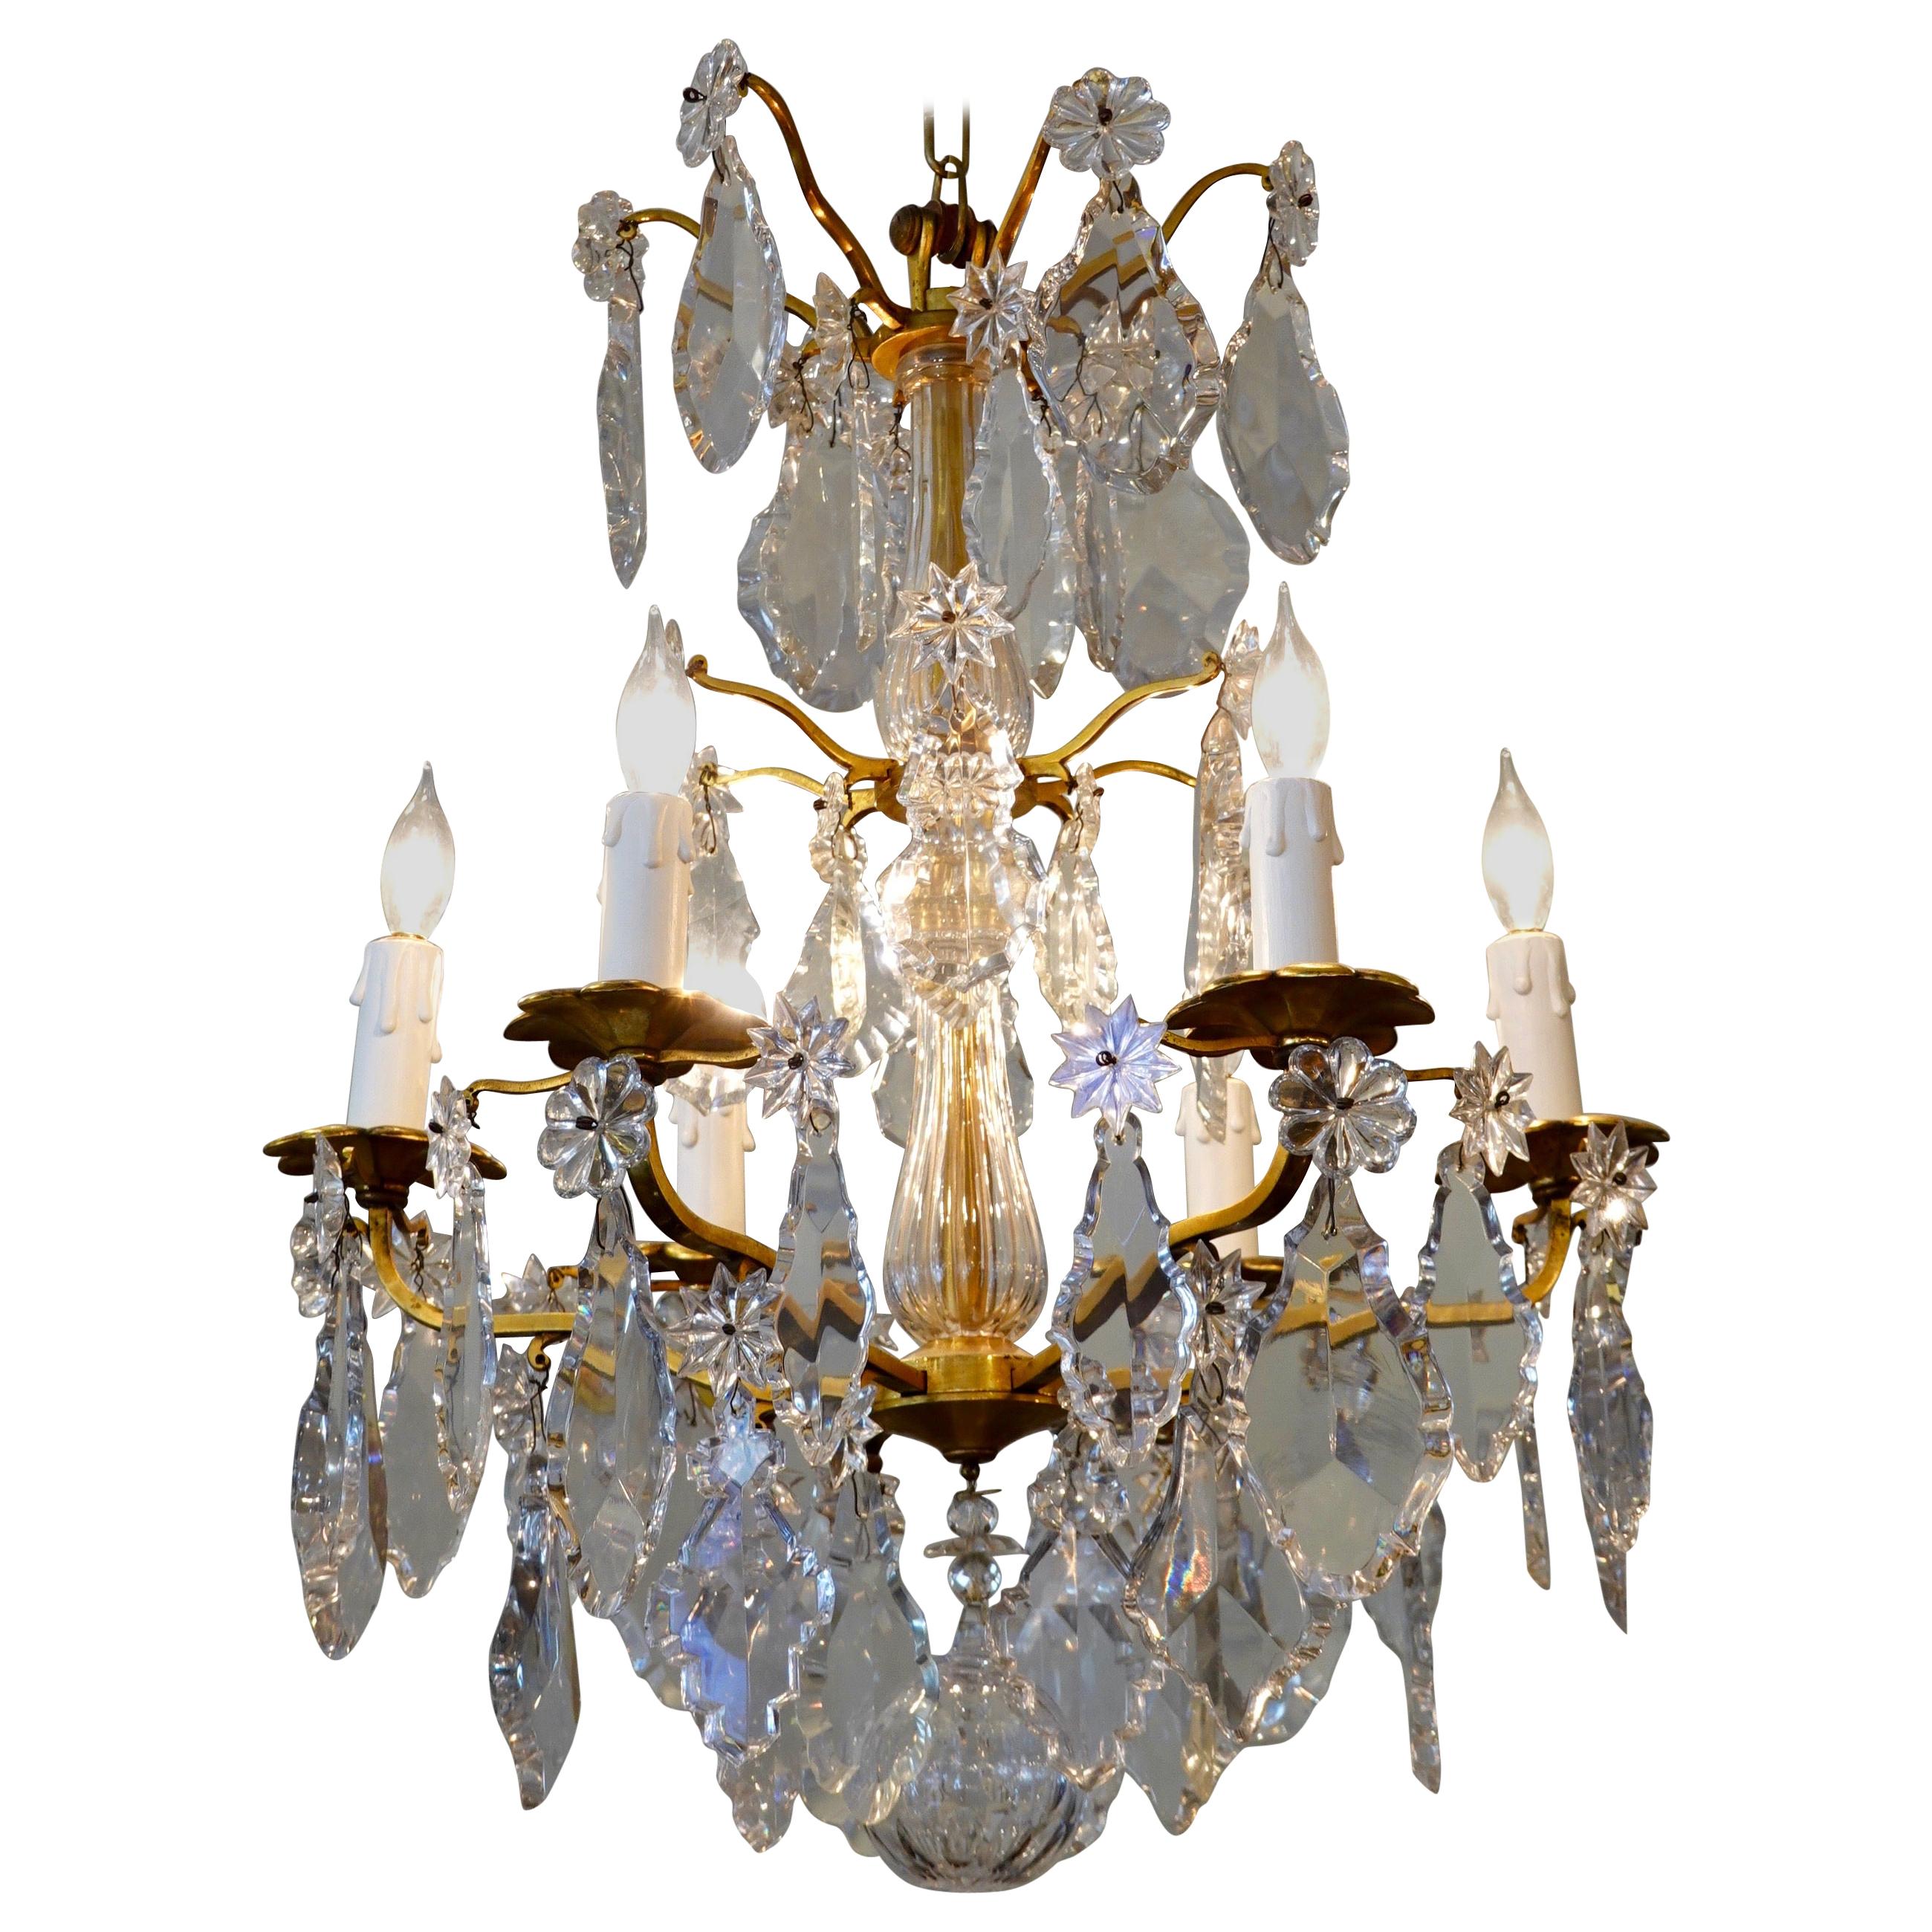 French Gilt-Bronze Chandelier with Exceptional Crystals